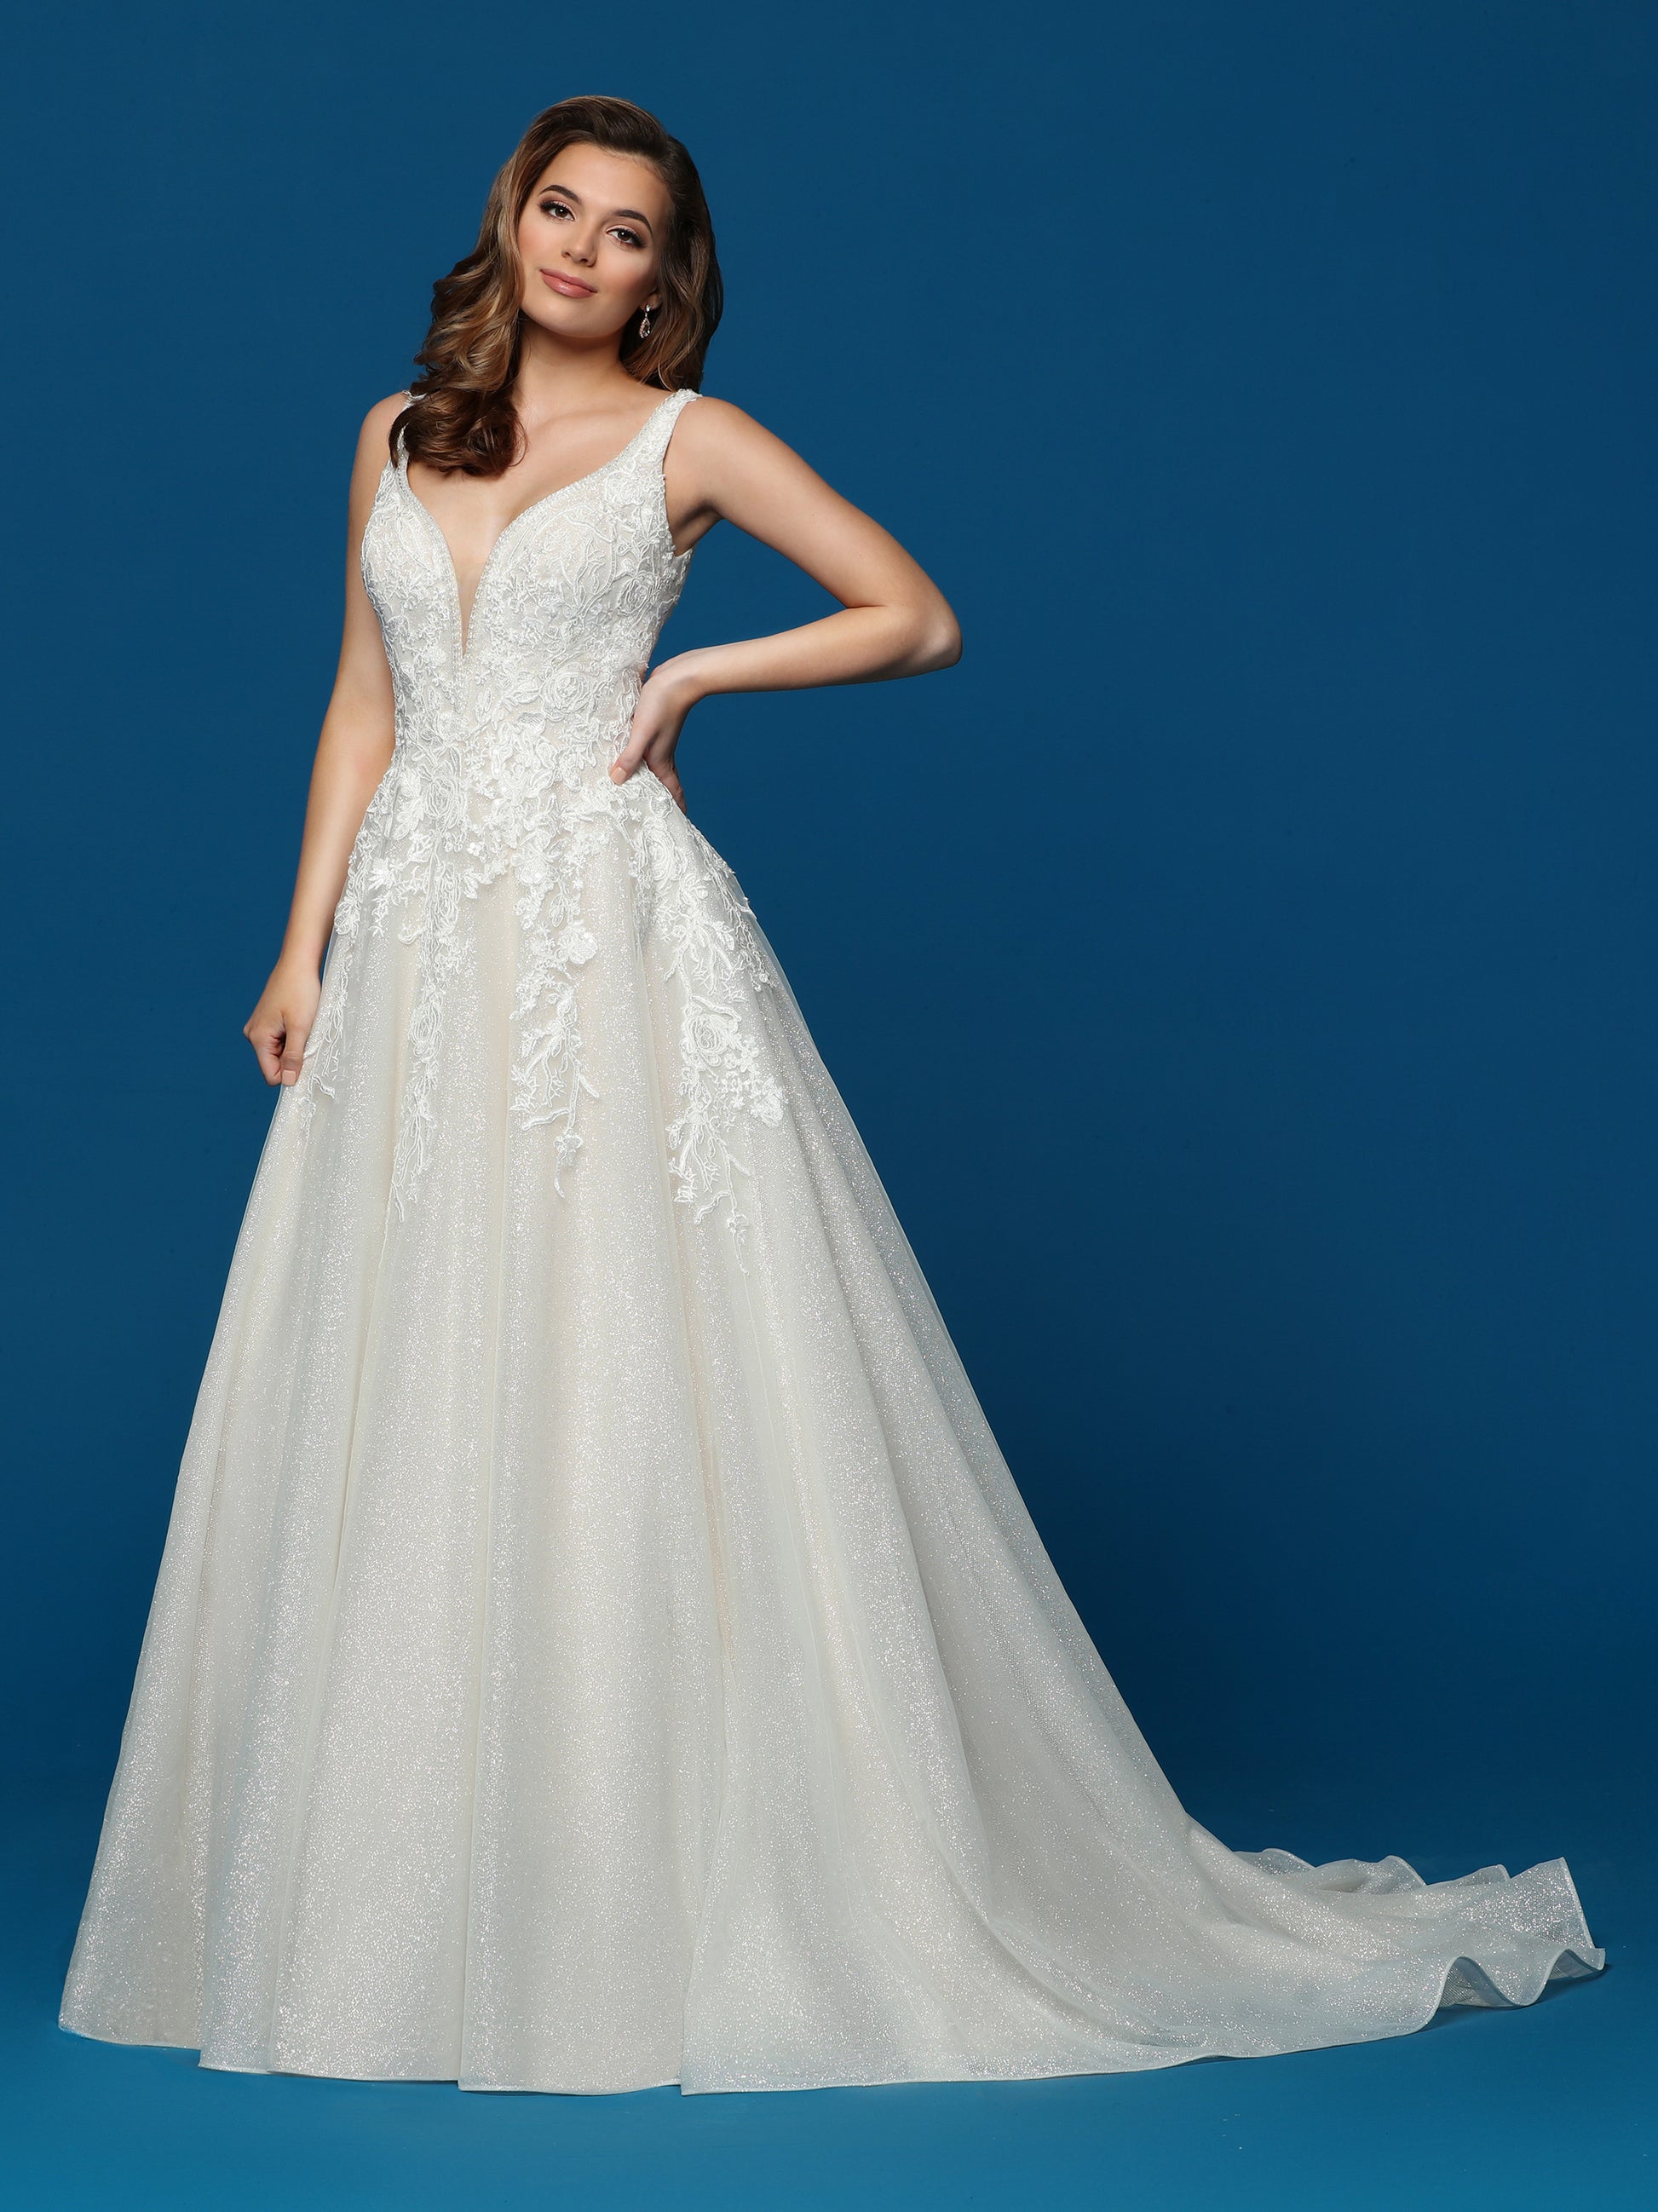 Davinci Bridal 50655 This is a sparkly lace and glittered tulle A line long wedding dress.  This bridal gown has a lace v neckline and a v back with a train.  Colors:  Ivory/Blush, Ivory/Ivory  Sizes  2-20